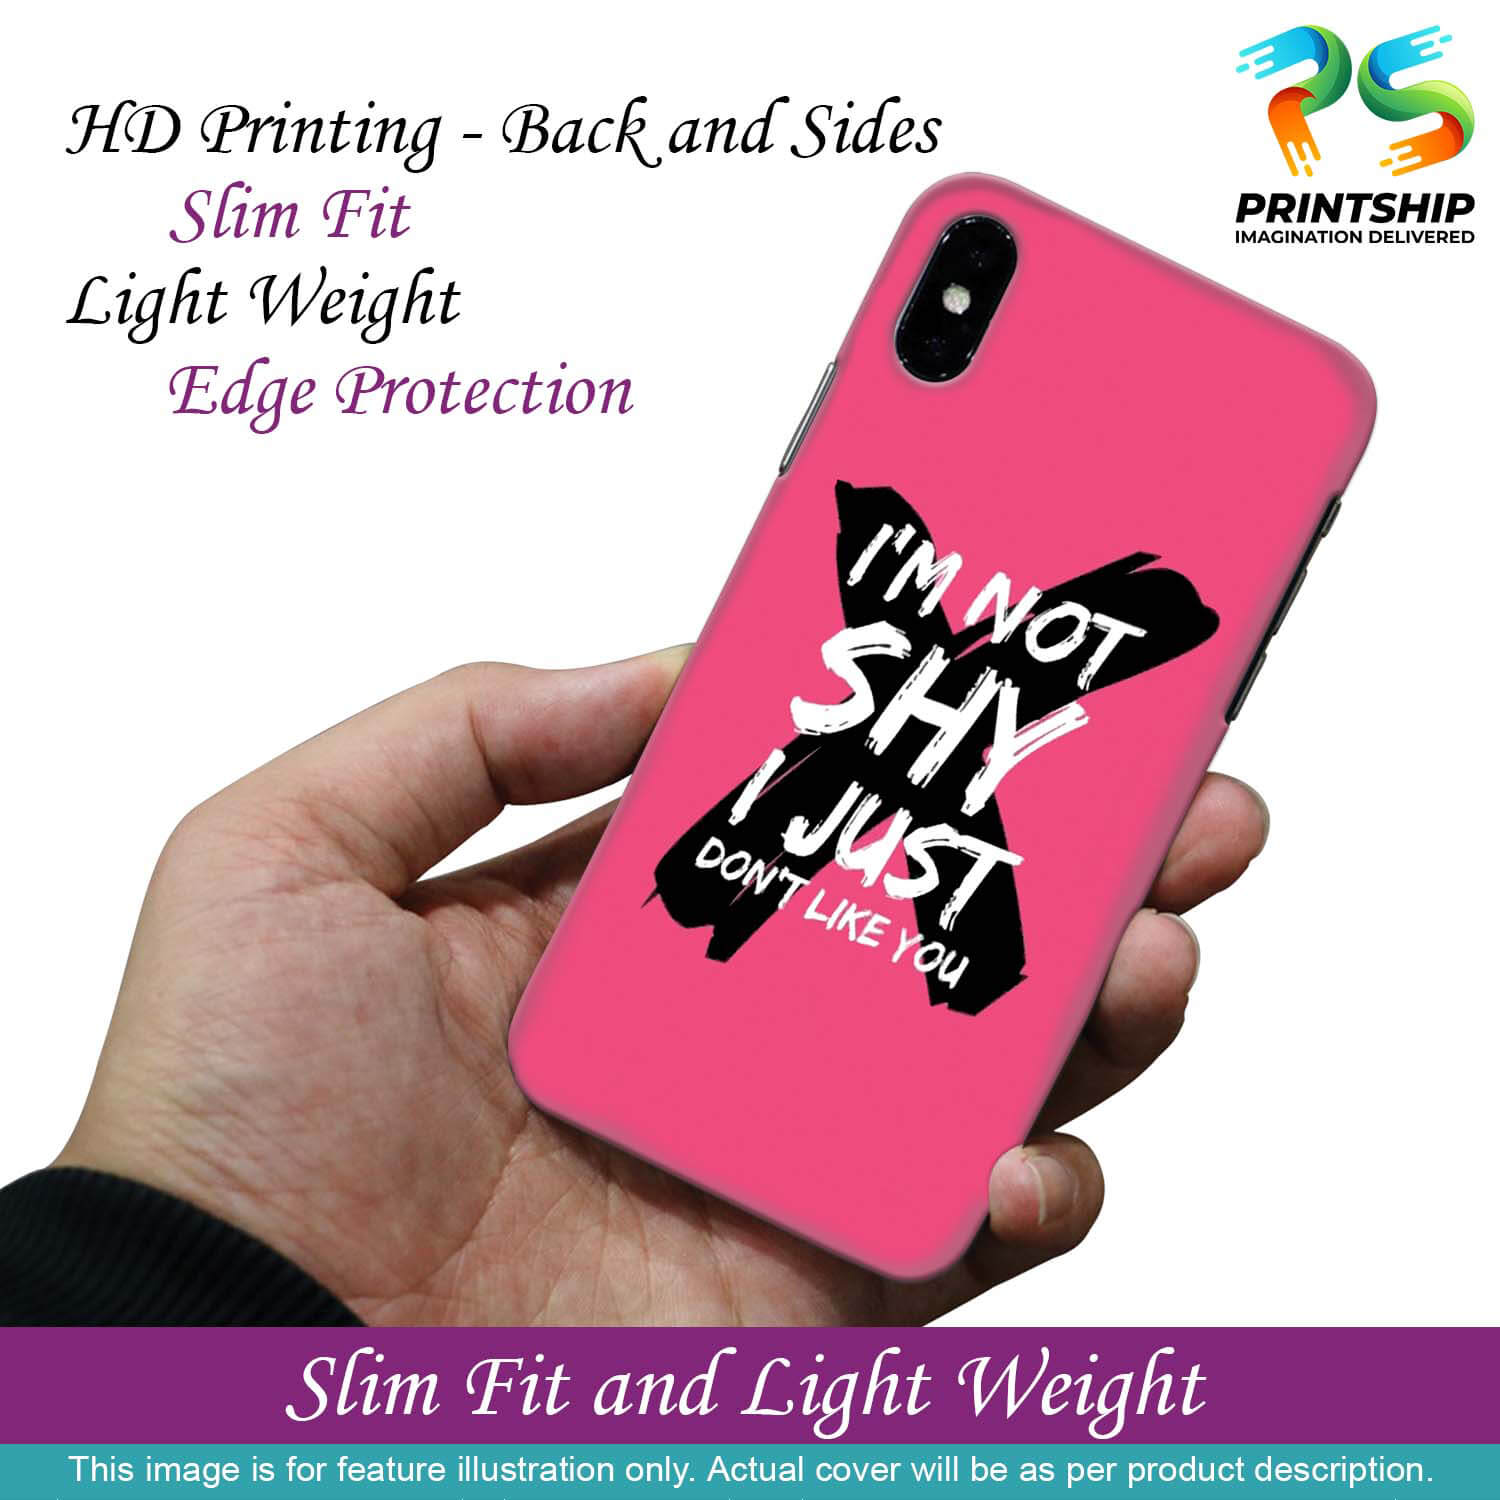 PS1322-I am Not Shy Back Cover for Xiaomi Redmi Note 9 Pro Max